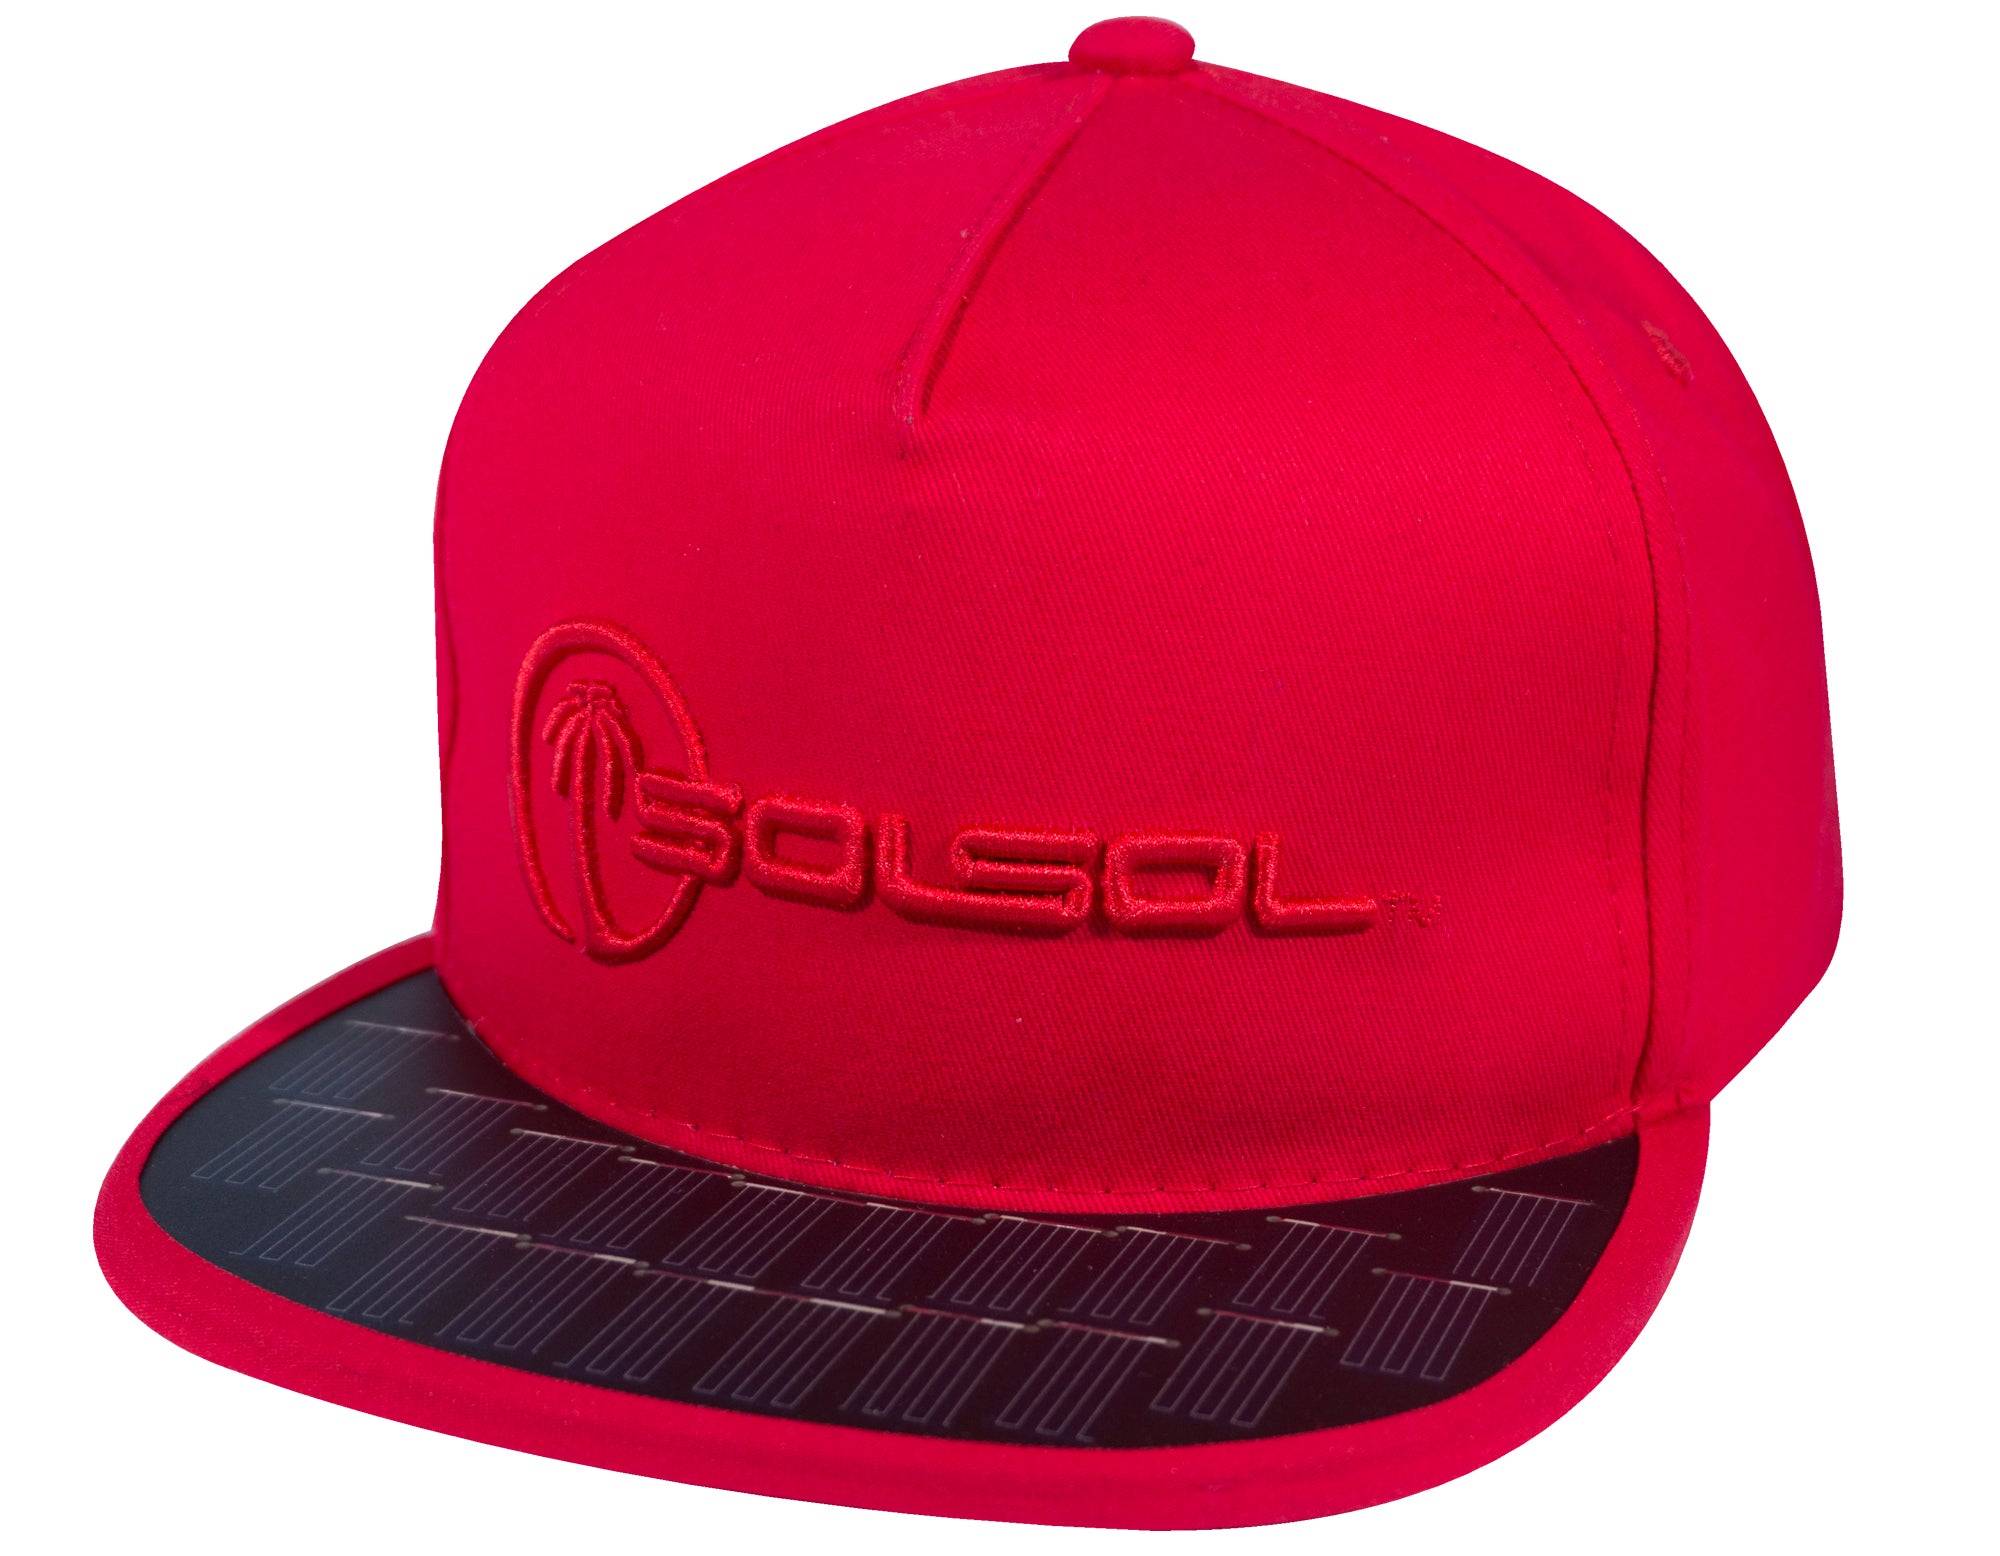 THE SOLSOL™ SNAPBACK 1.1W SOLAR CHARGER HAT